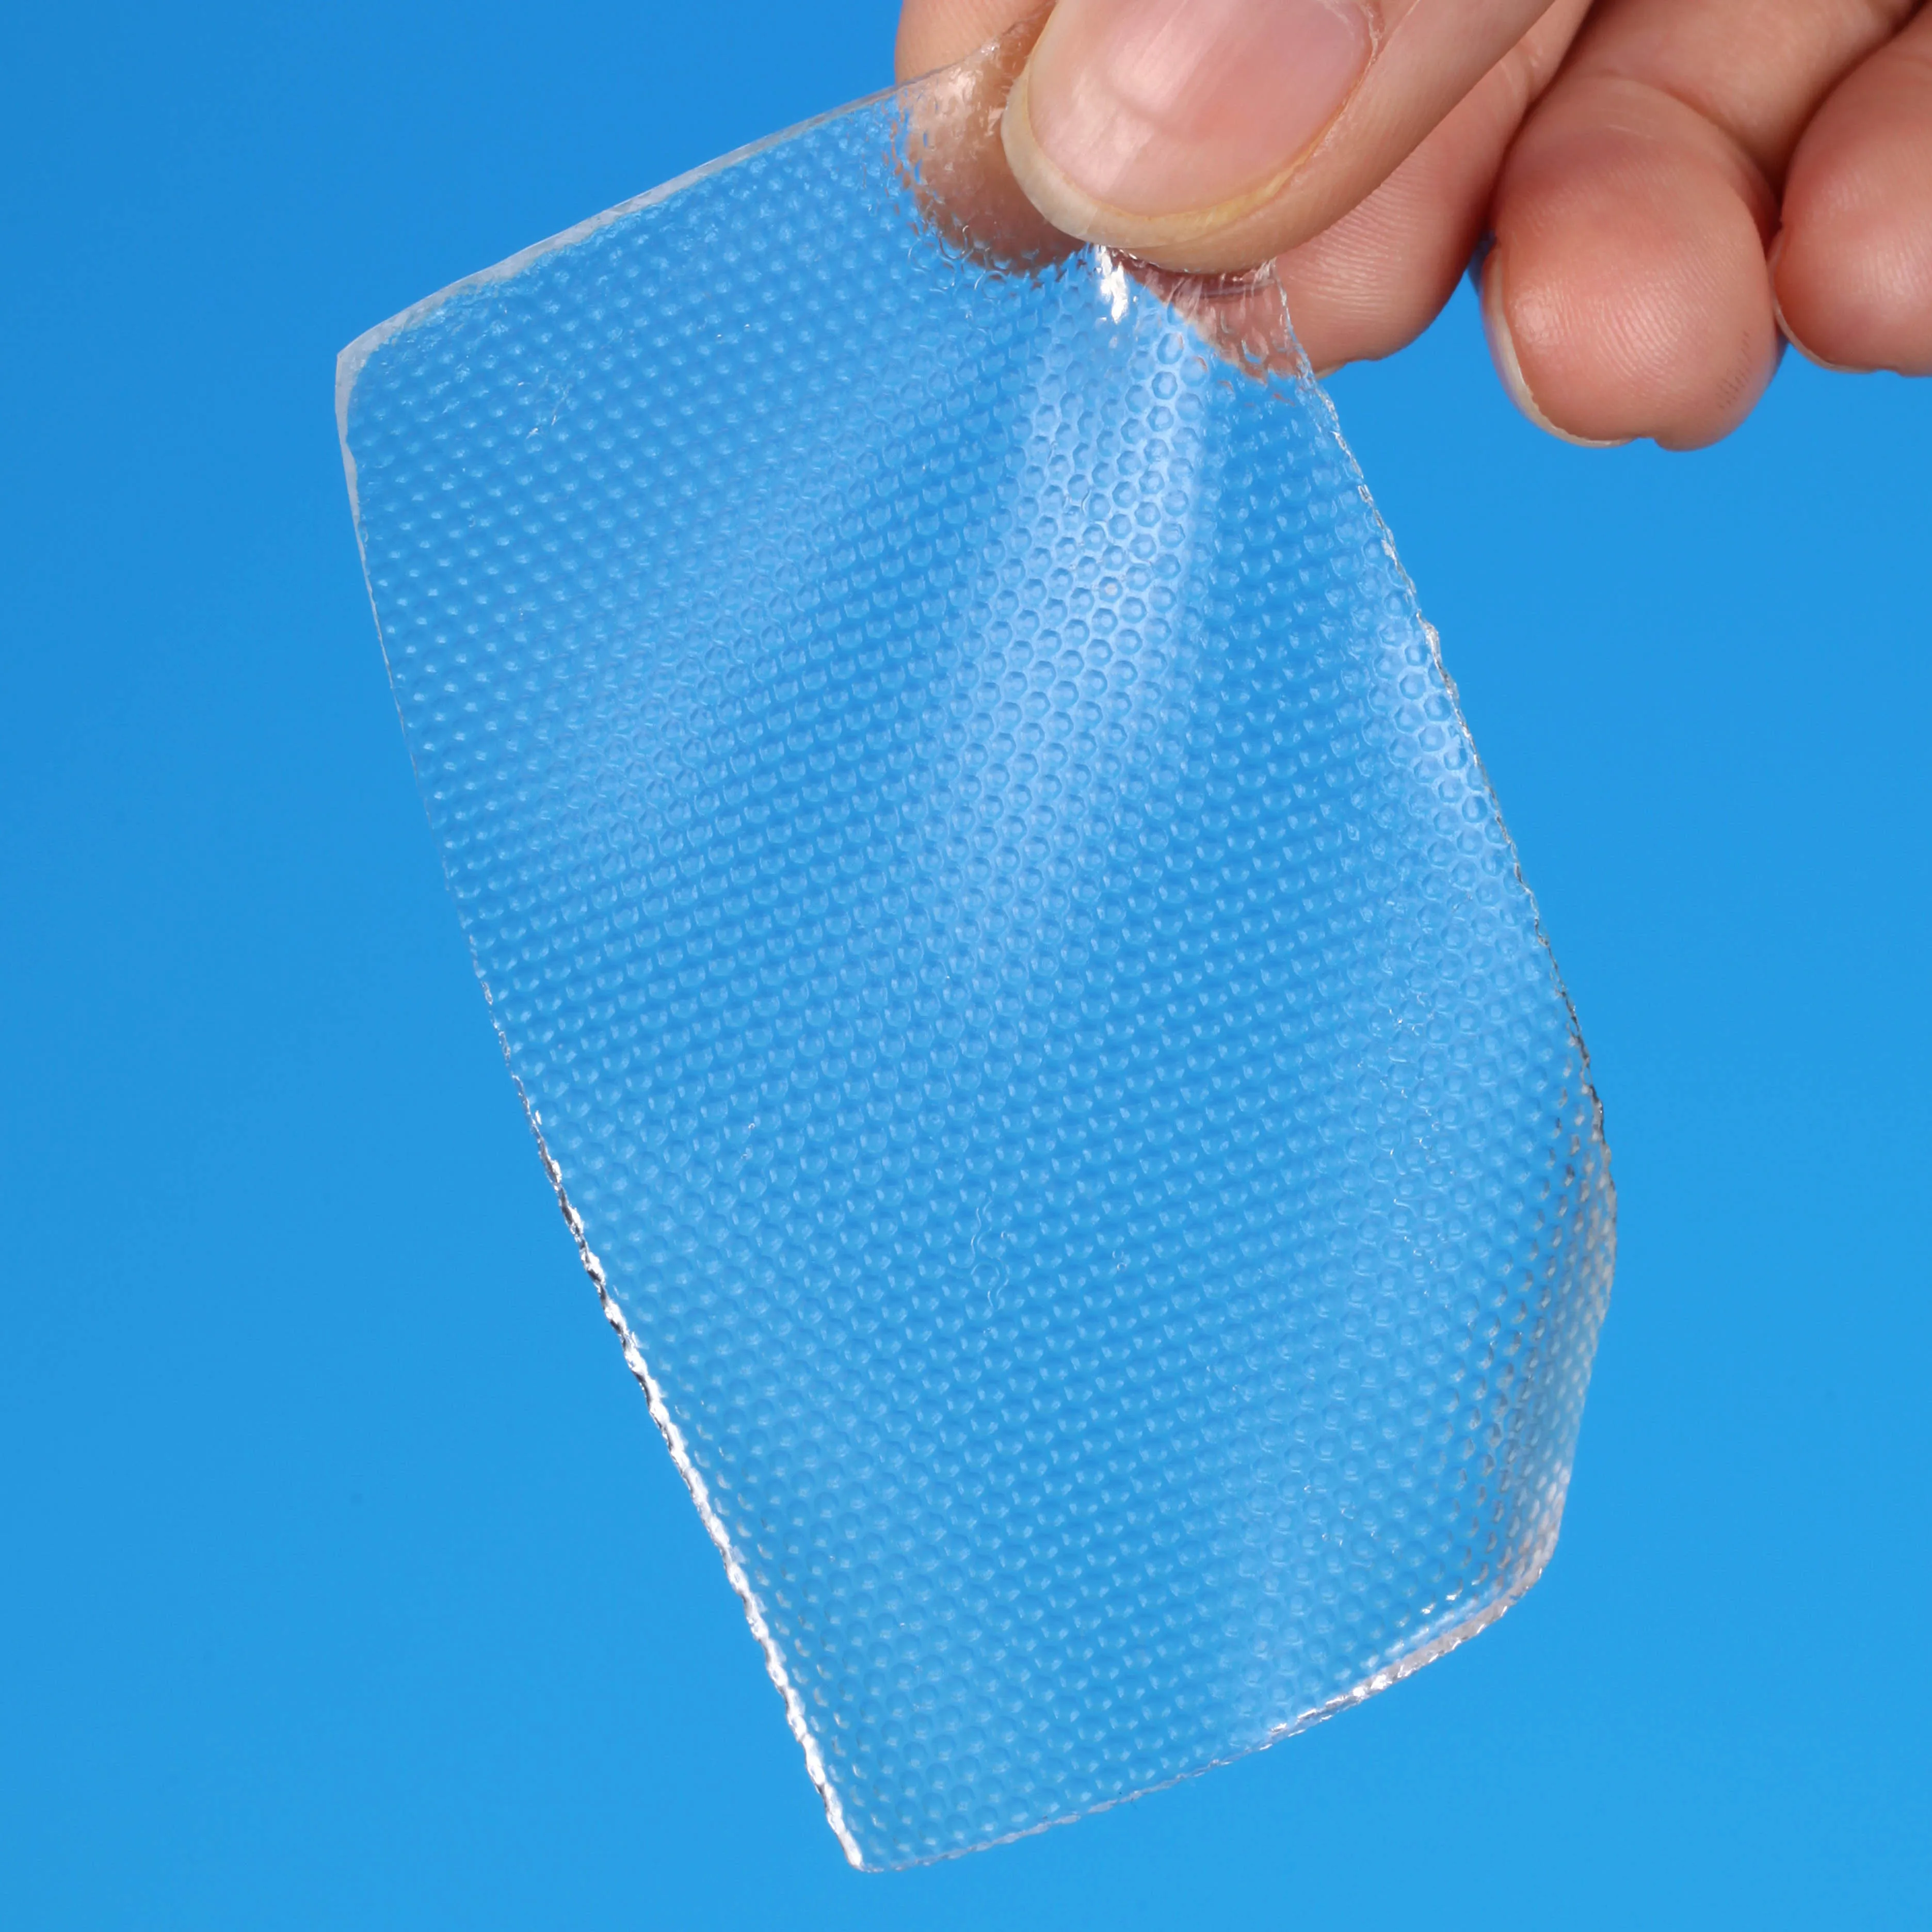 buy silicone gel sheets